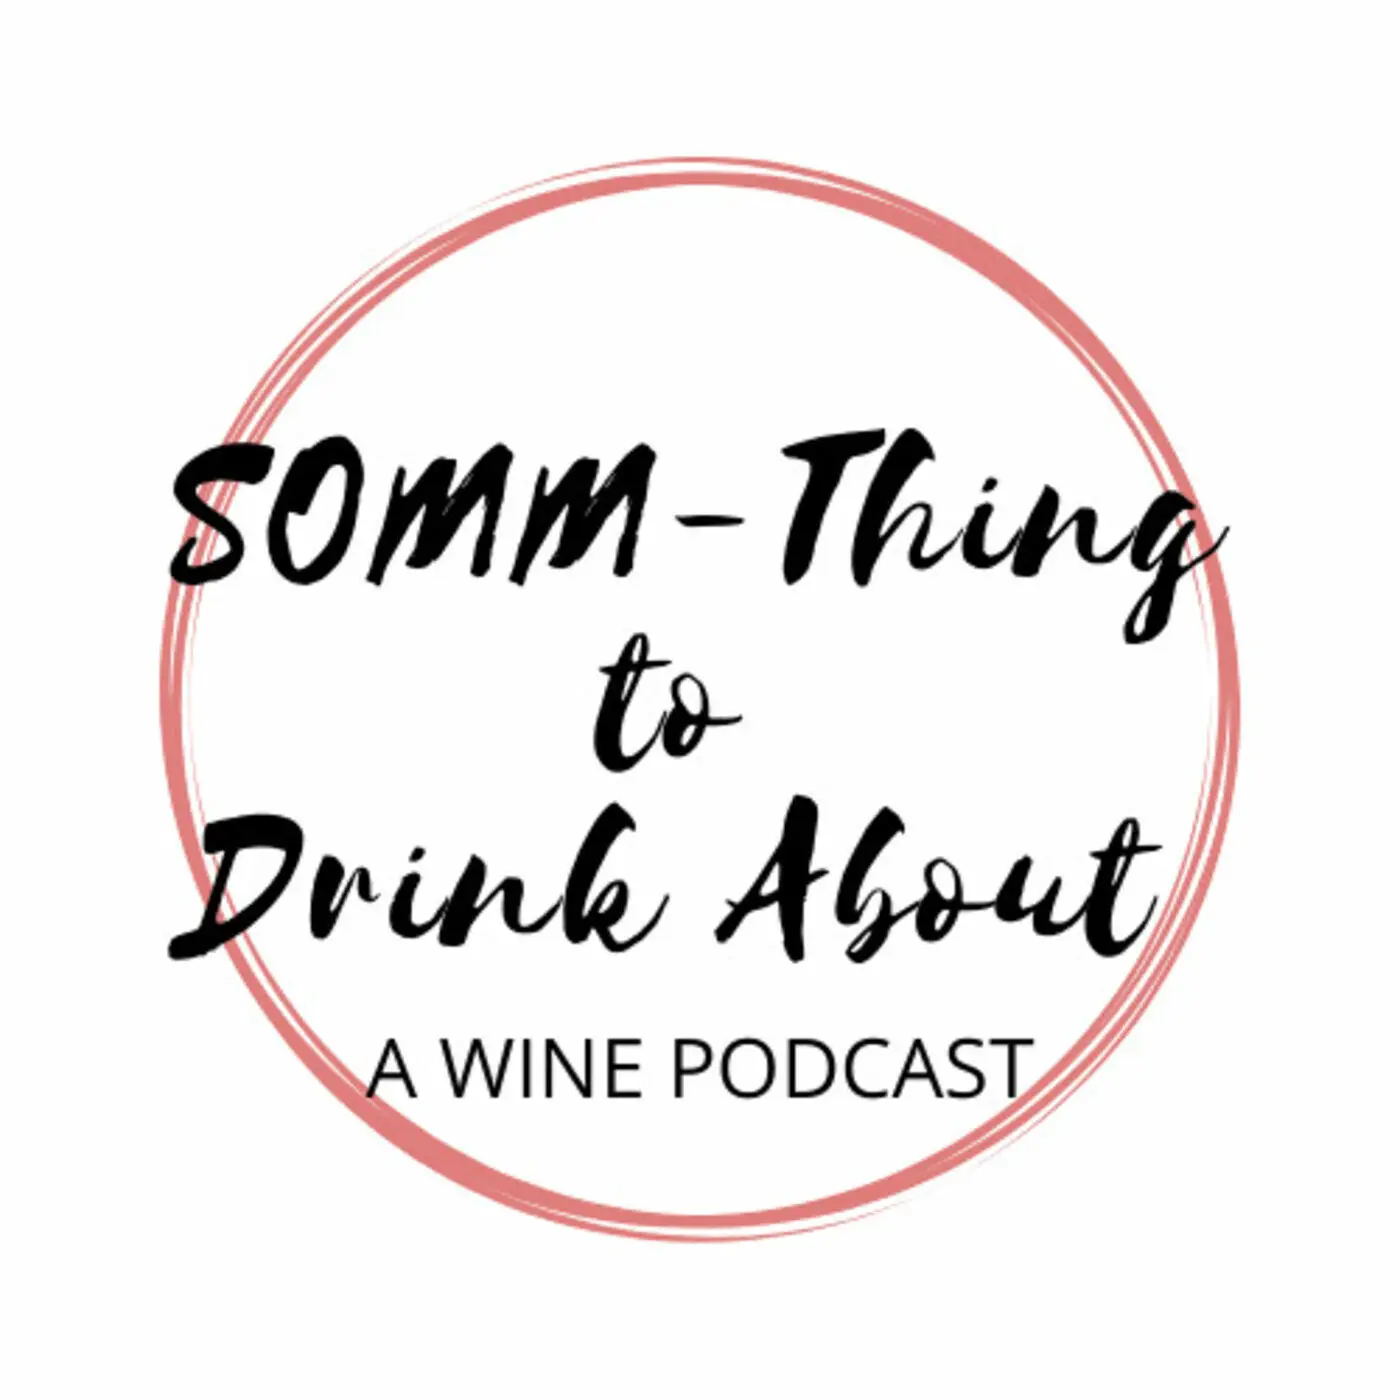 A Wine Podcast